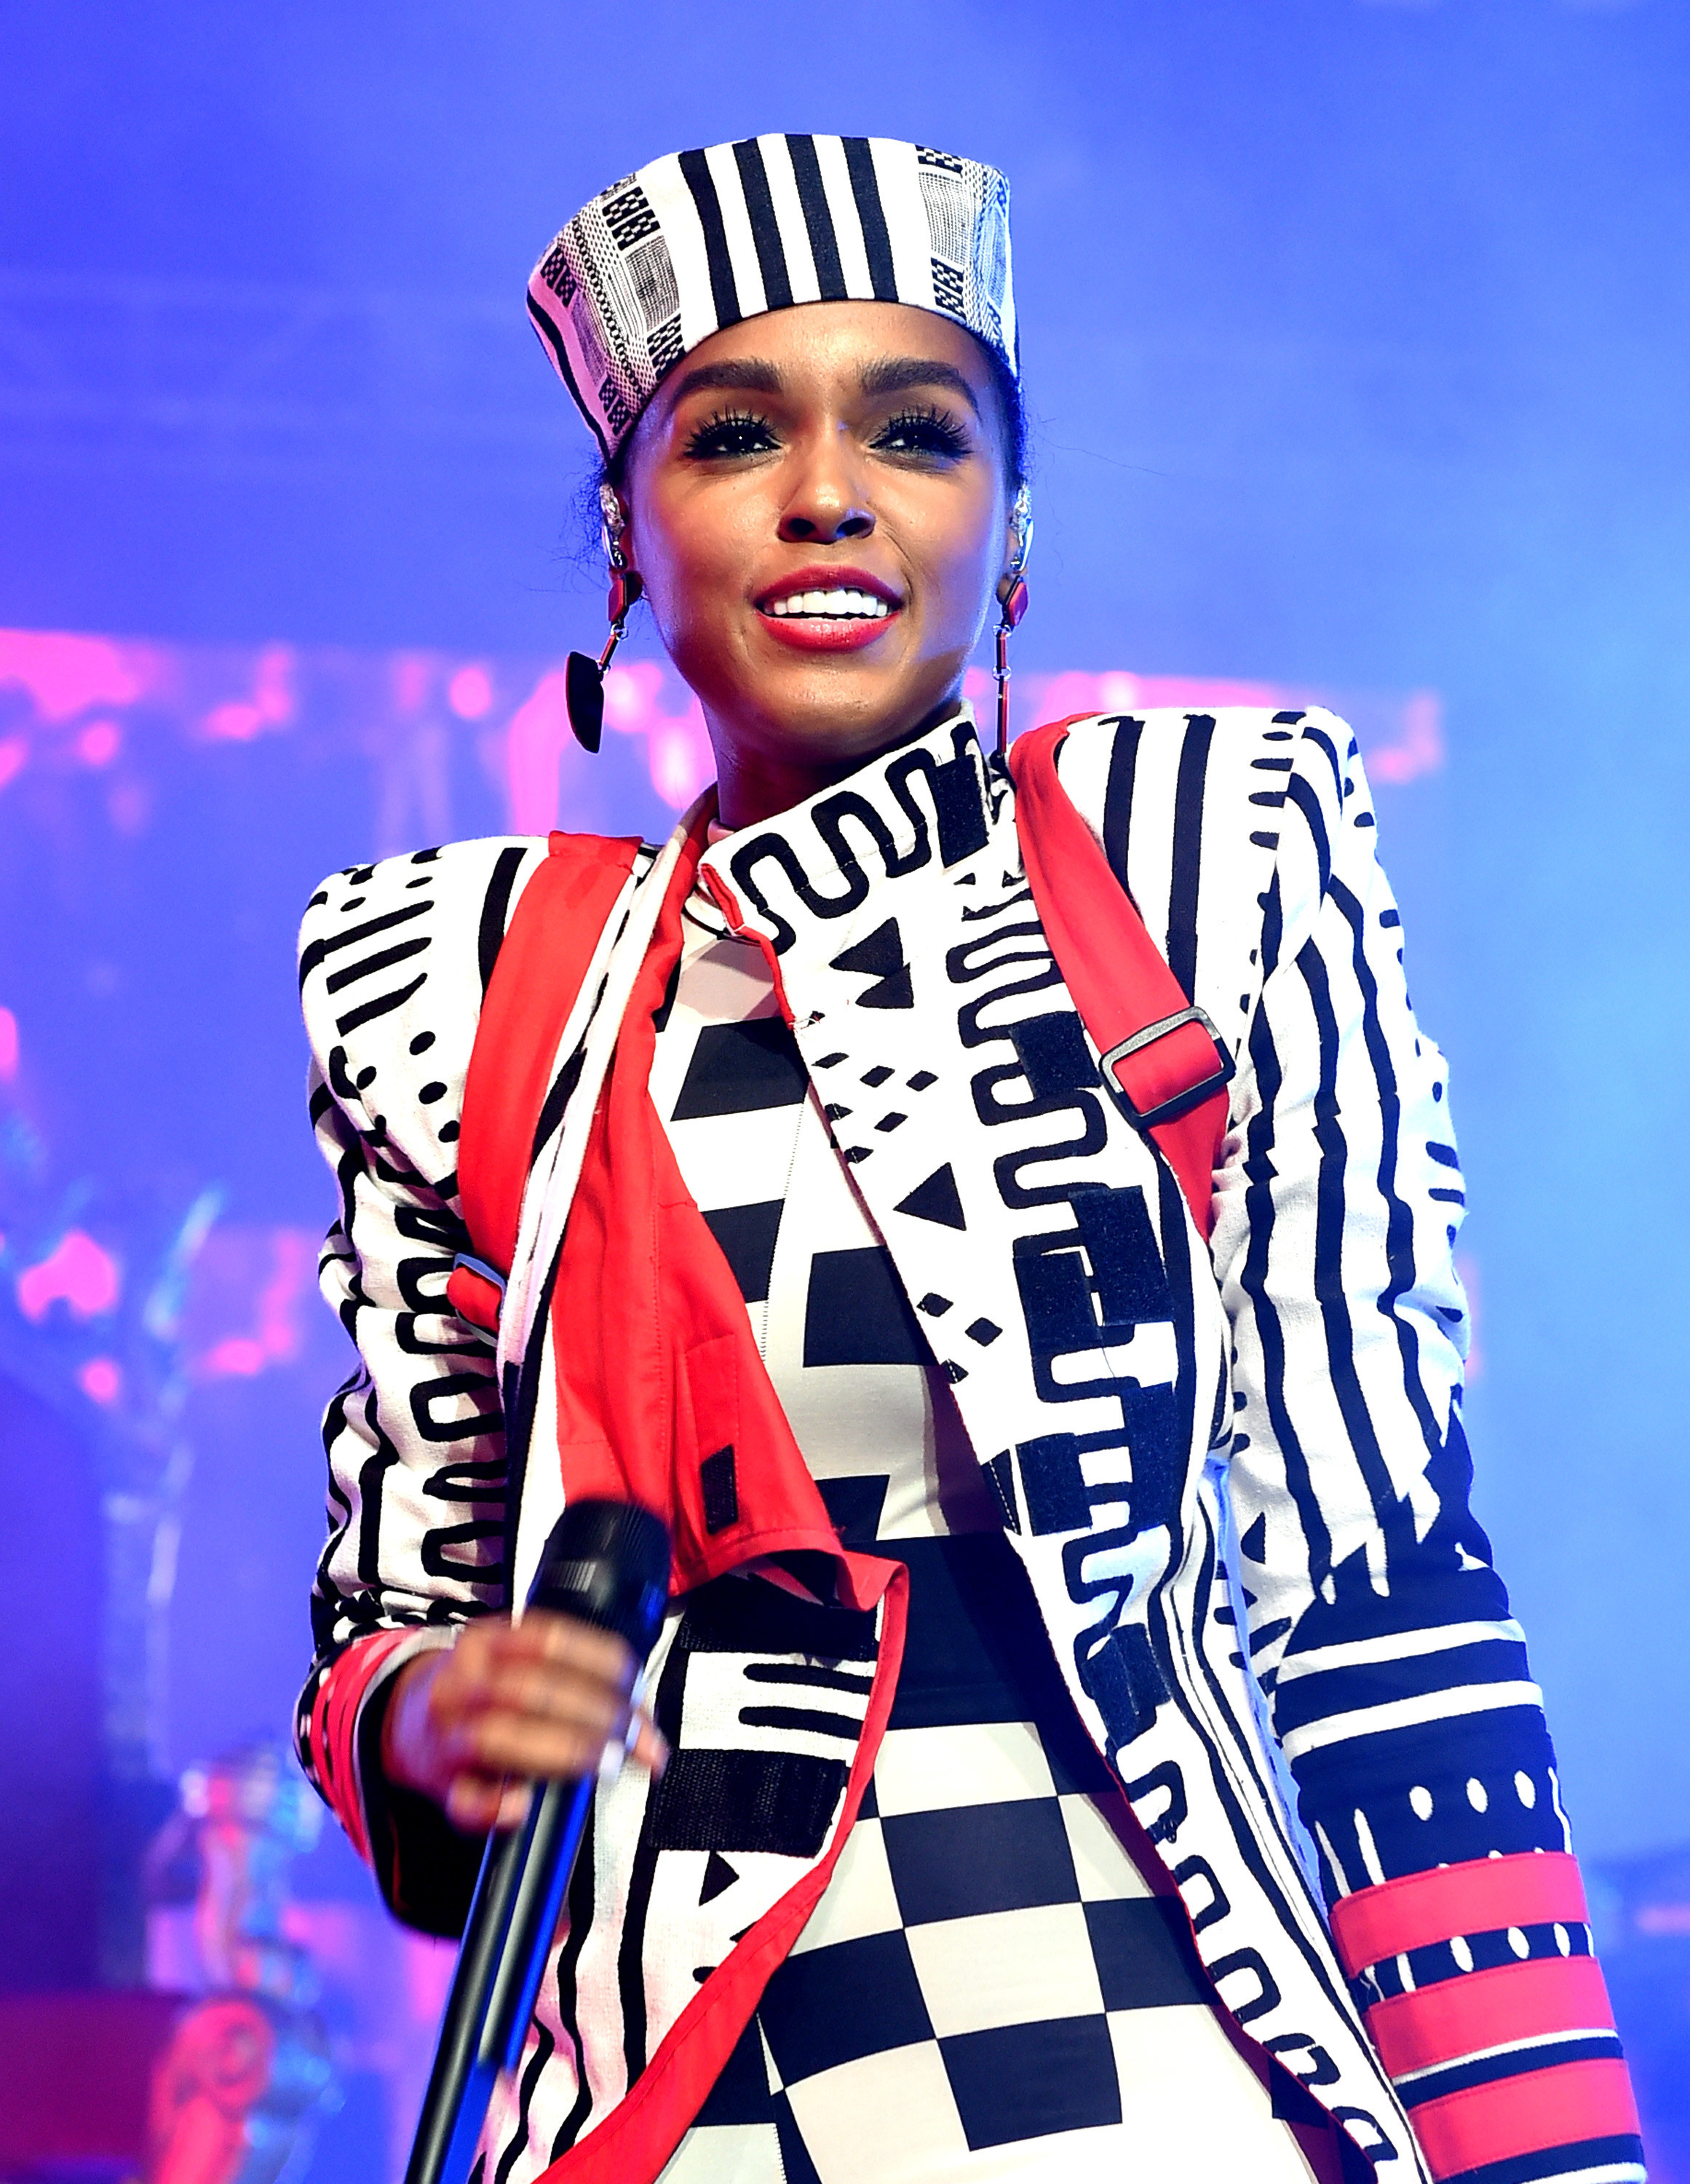 Janelle Monae performs at the Greek Theatre on June 28, 2018 in Los Angeles, California